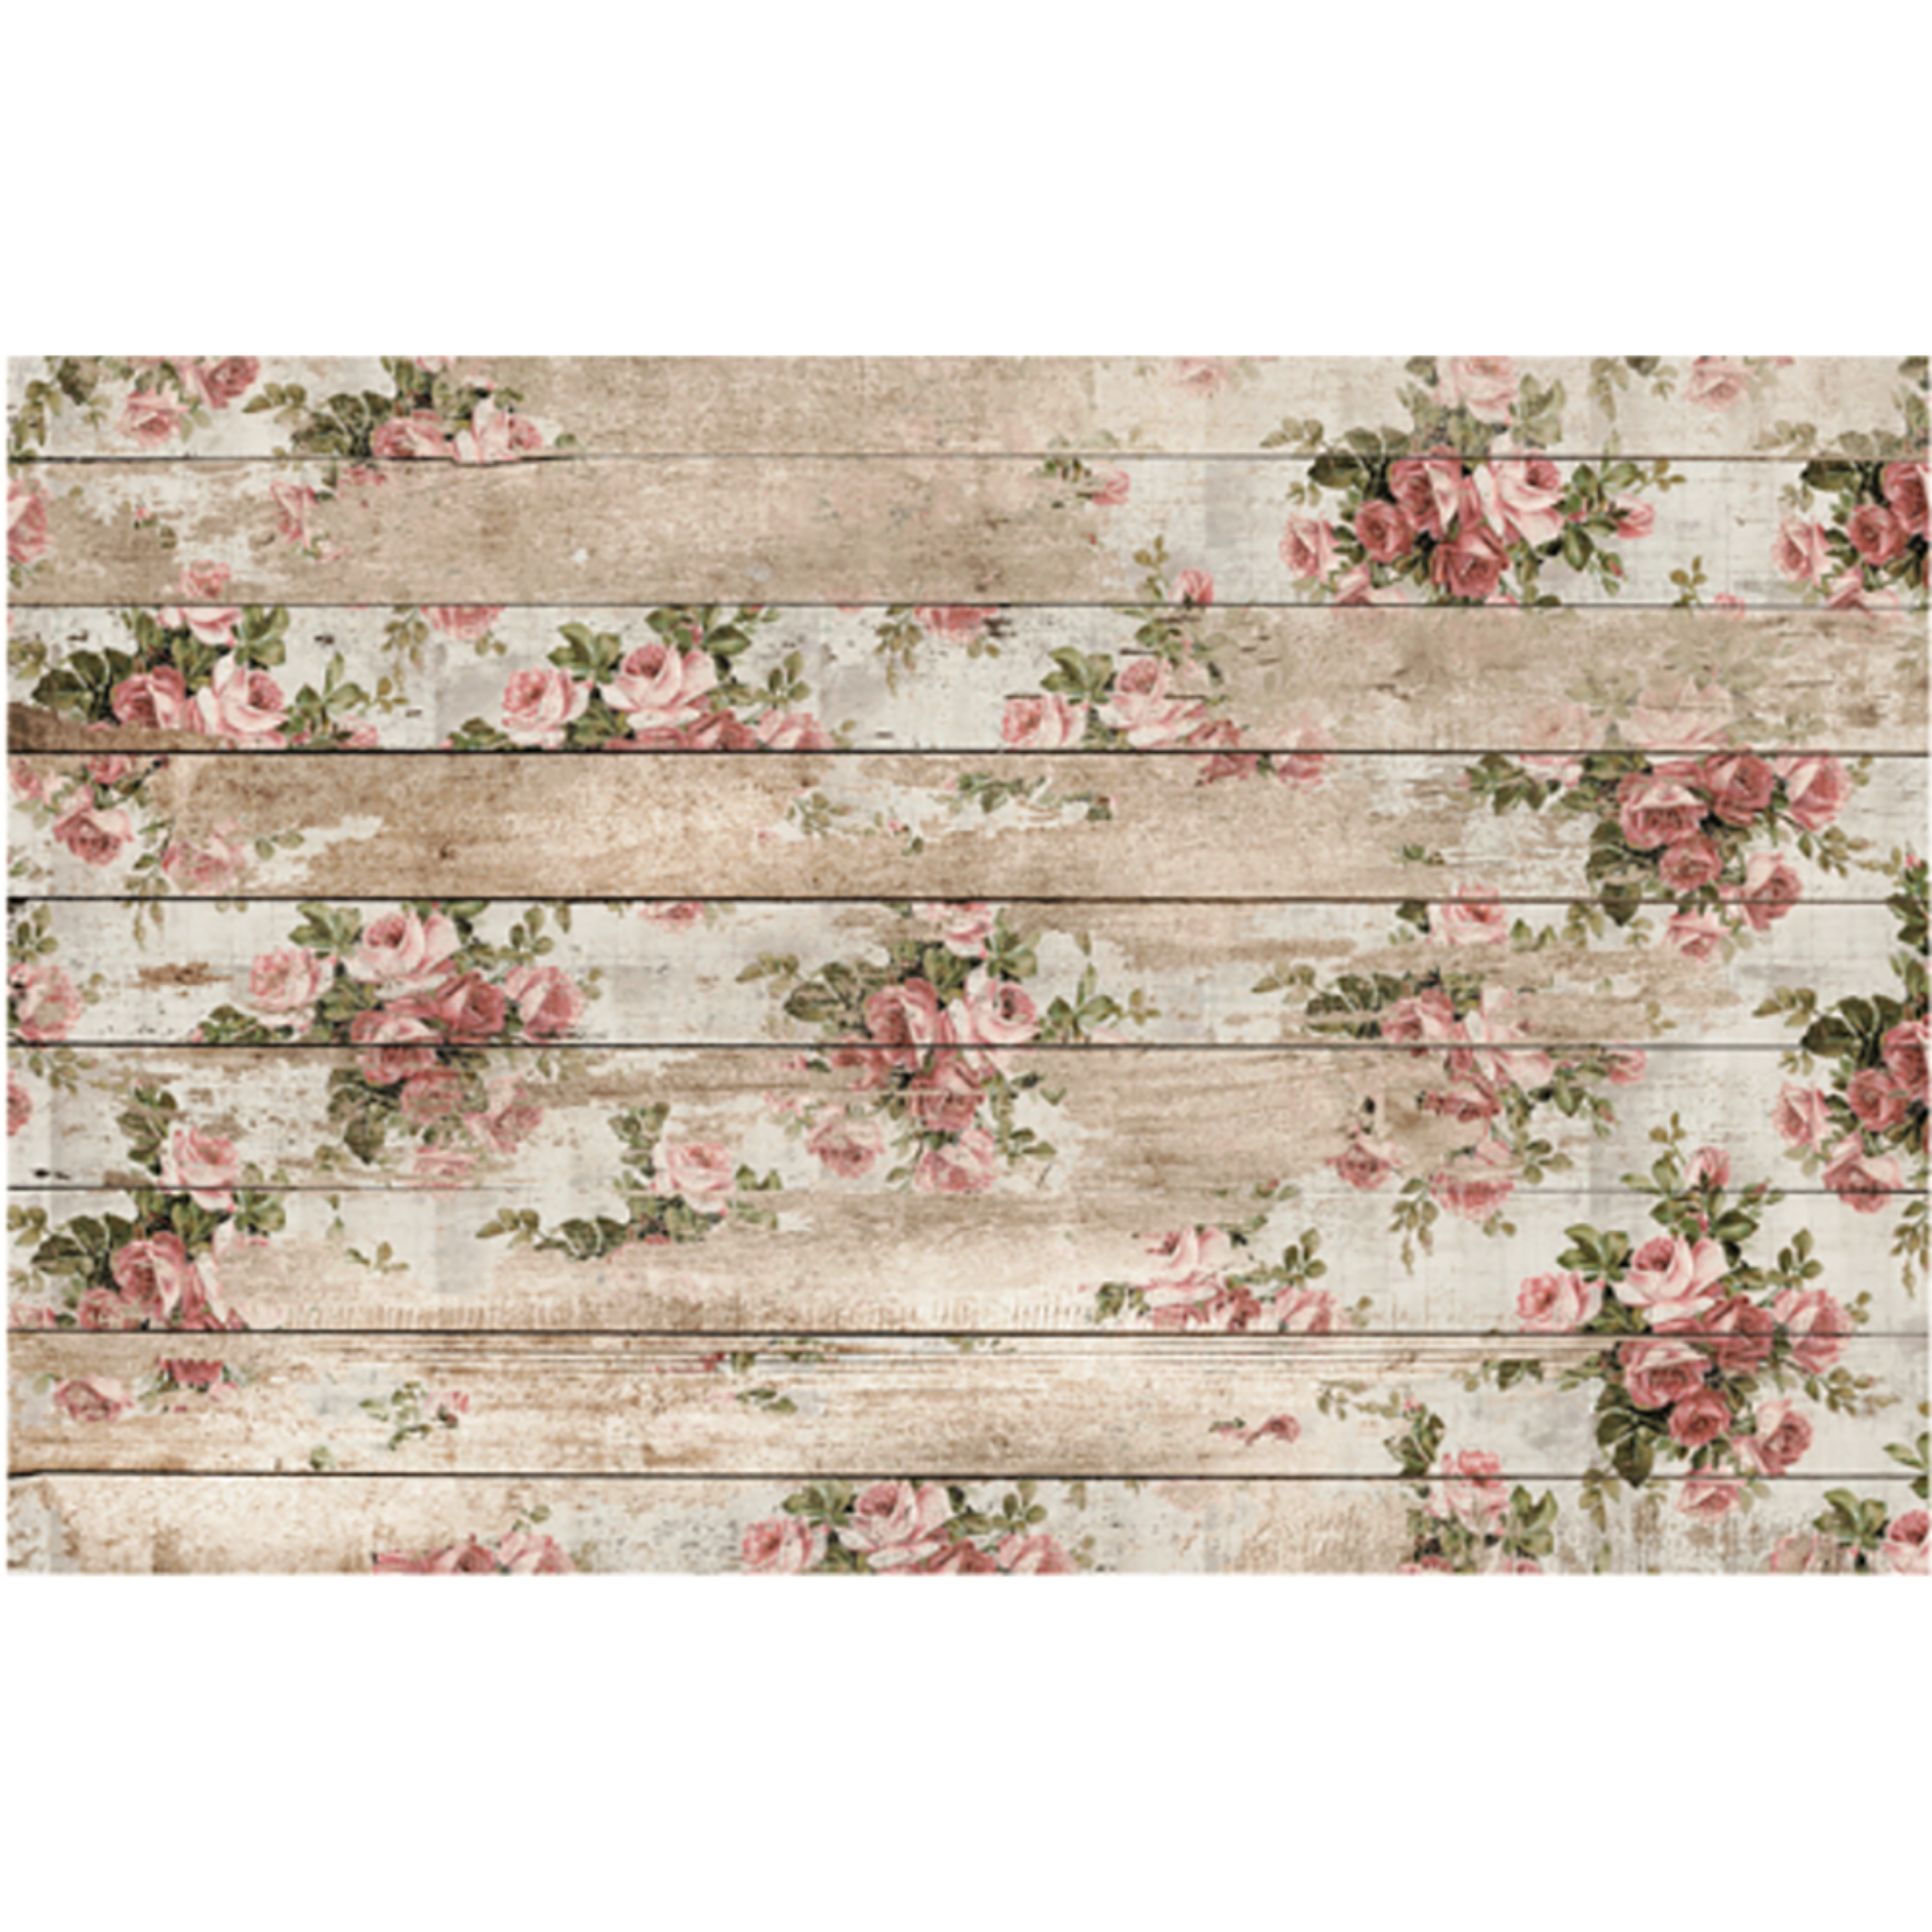 Small clusters of light pink/coral roses on a weathered boarded background. Very shabby chic.